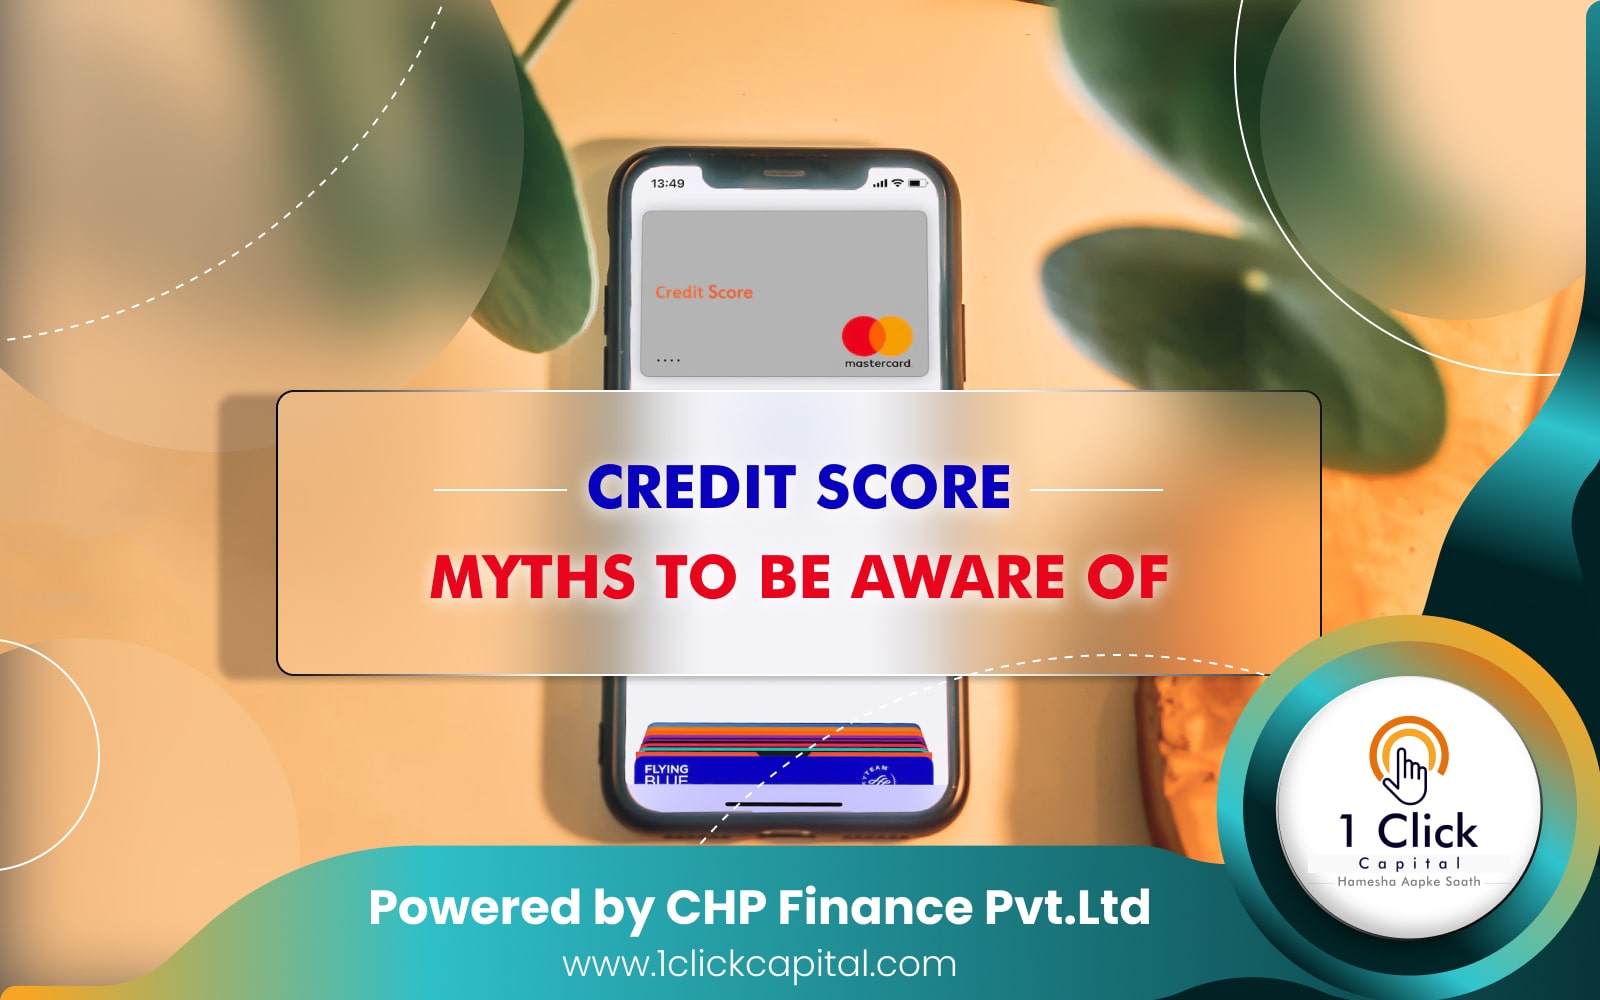 You are currently viewing CREDIT SCORE MYTHS TO BE AWARE OF